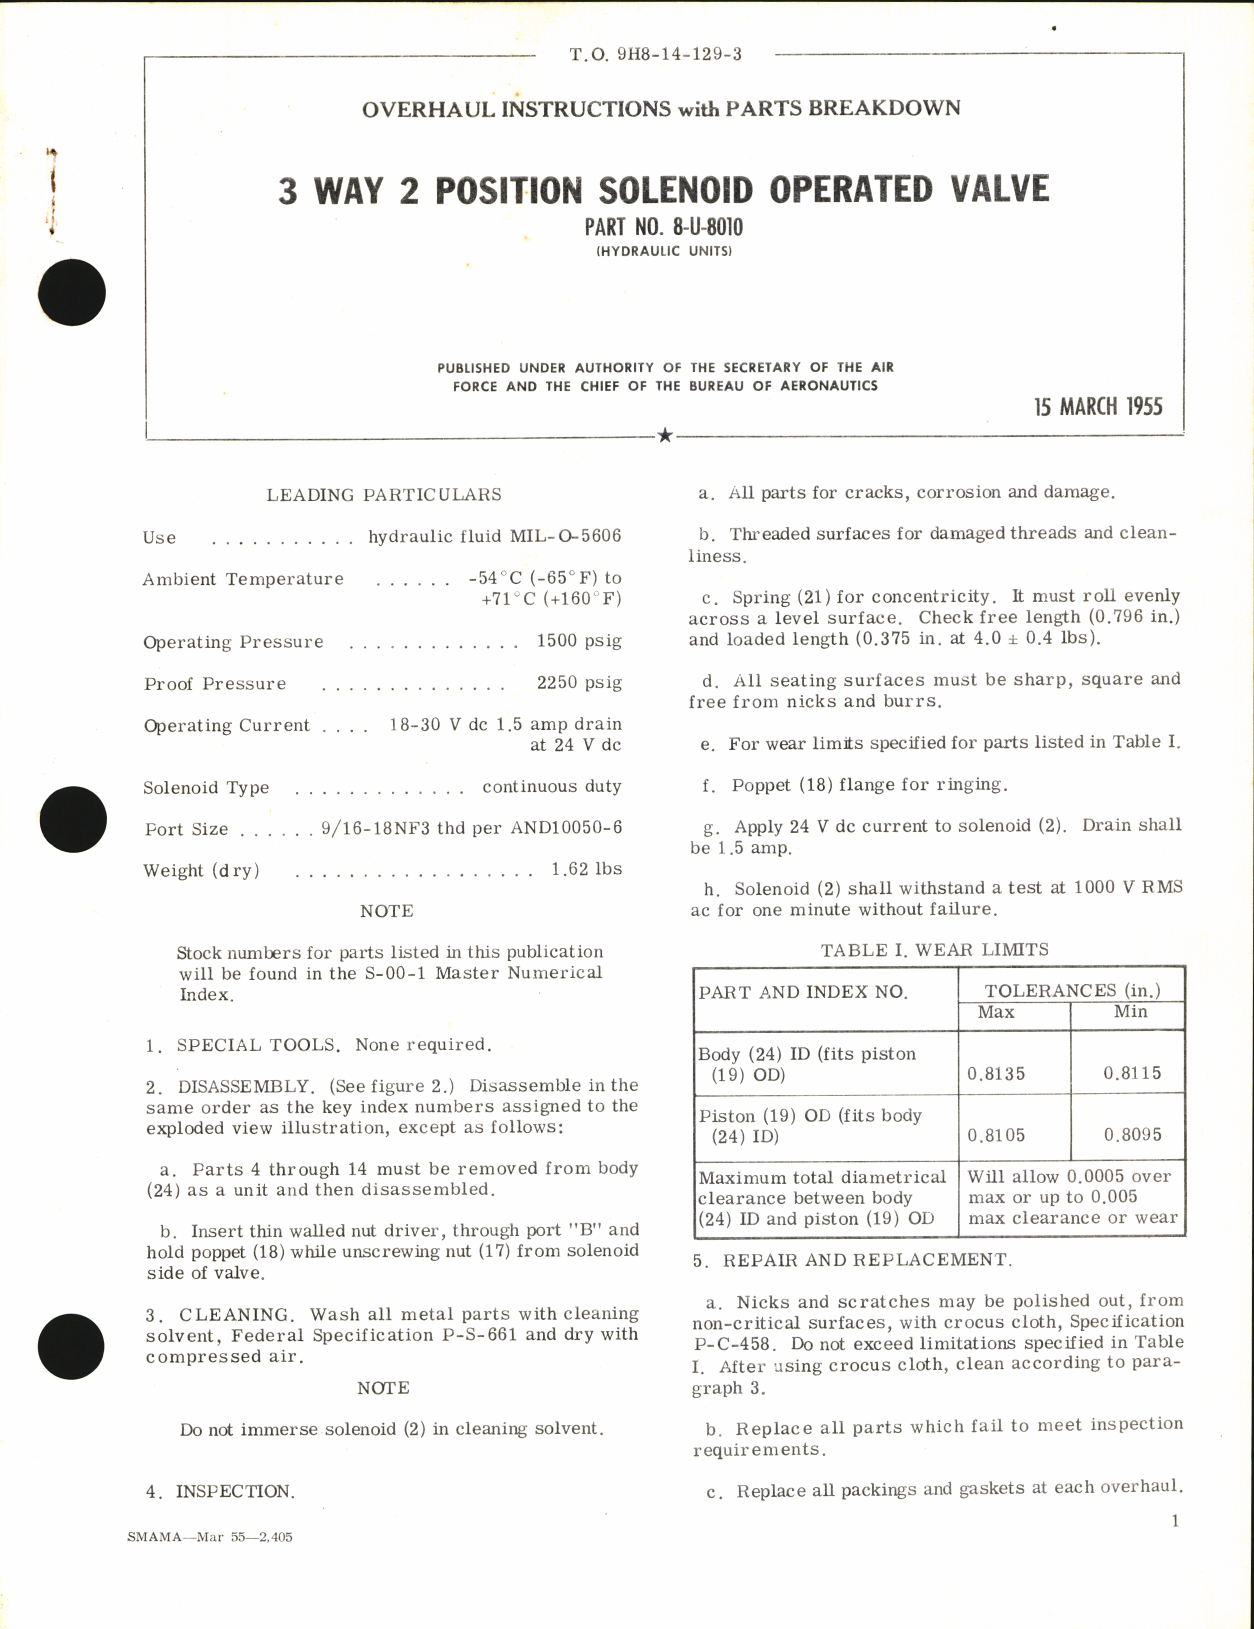 Sample page 1 from AirCorps Library document: Overhaul Instructions with Parts Breakdown for 3 Way 2 Position Solenoid Operated Valve Part No. 8-U-800